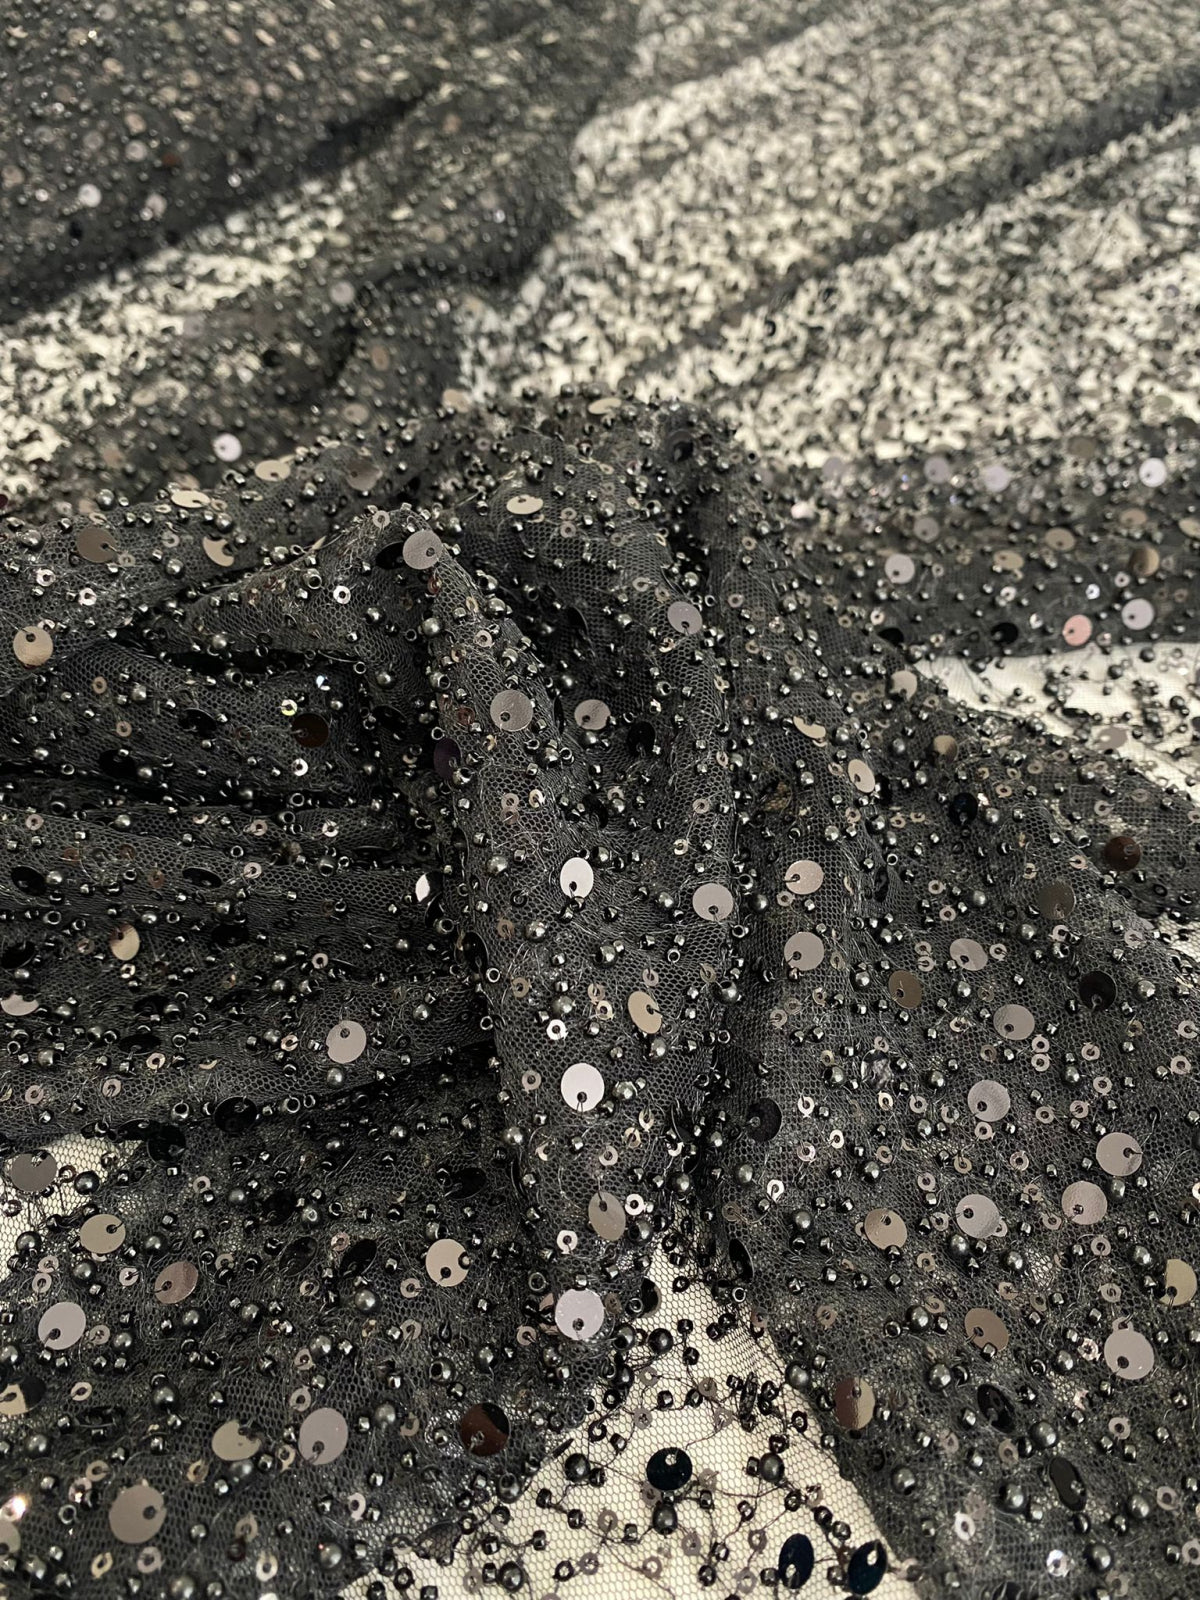 Black Lace with Pearls, Beads and Sequins